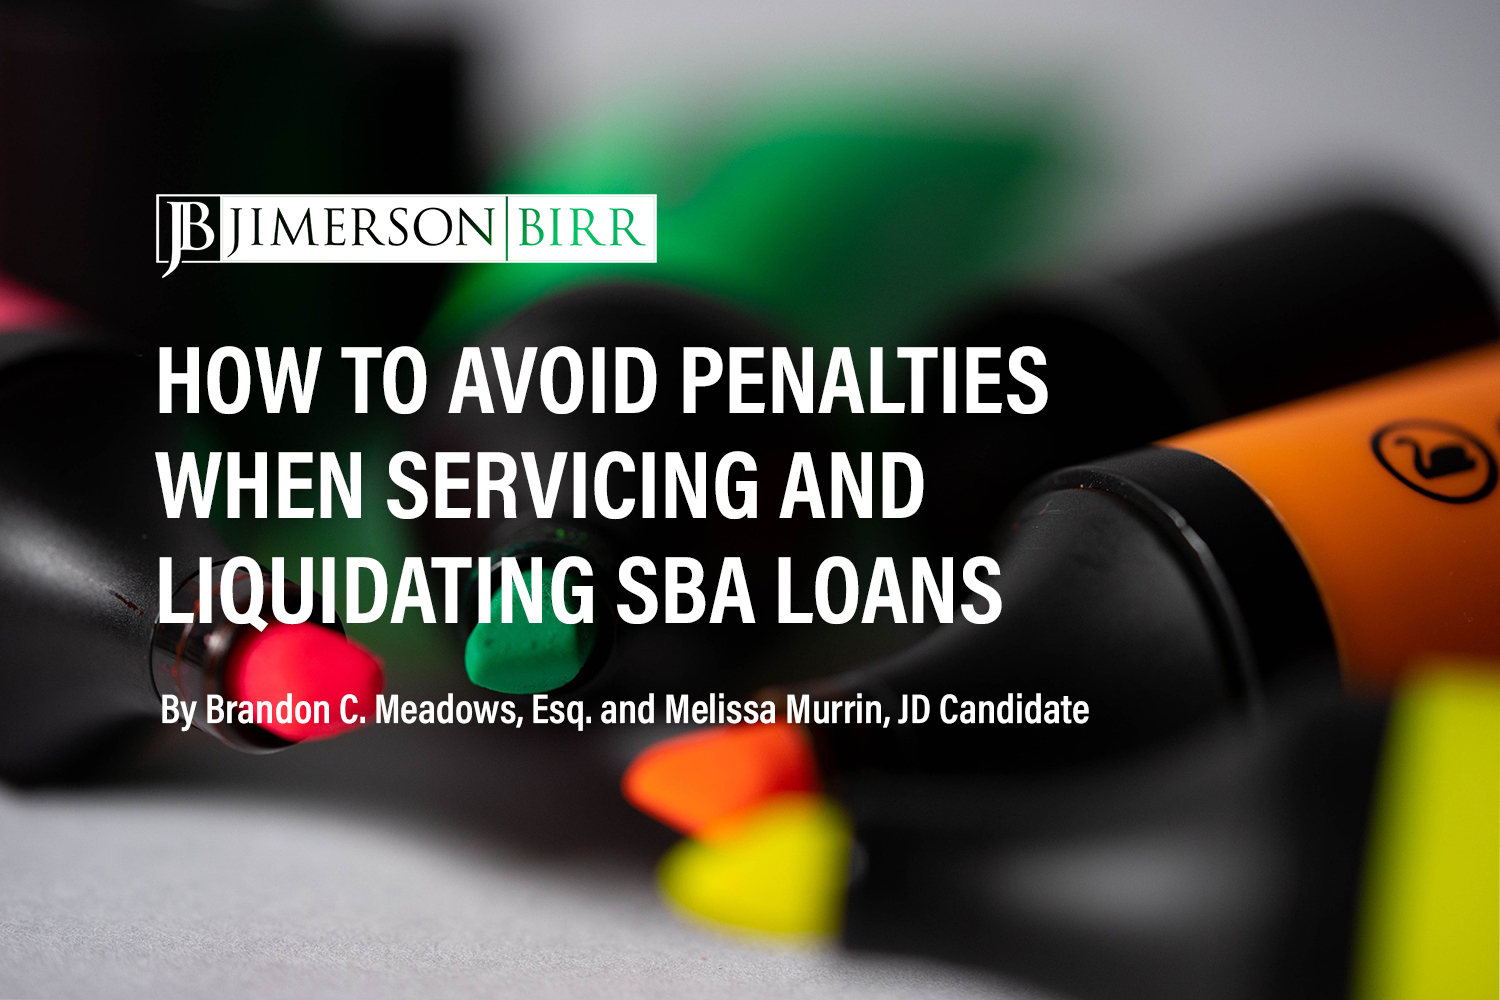 What Responsibility and Authority do SBA Lenders Have in Servicing and Liquidating Loans?